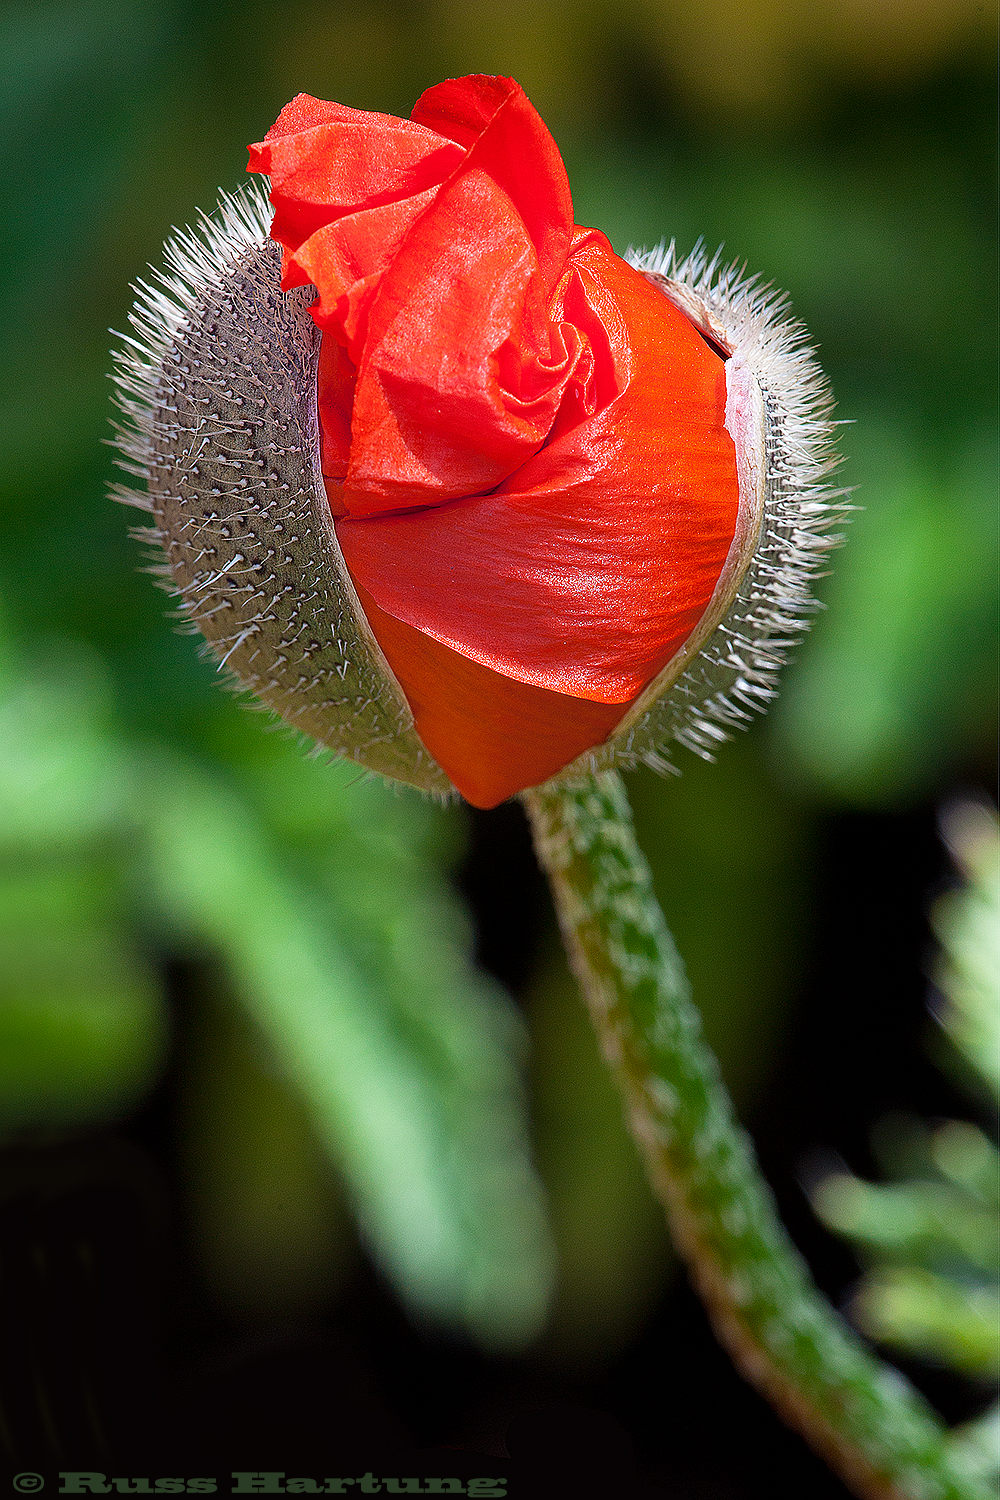 Poppy blossom just breaking out of it's bud. 